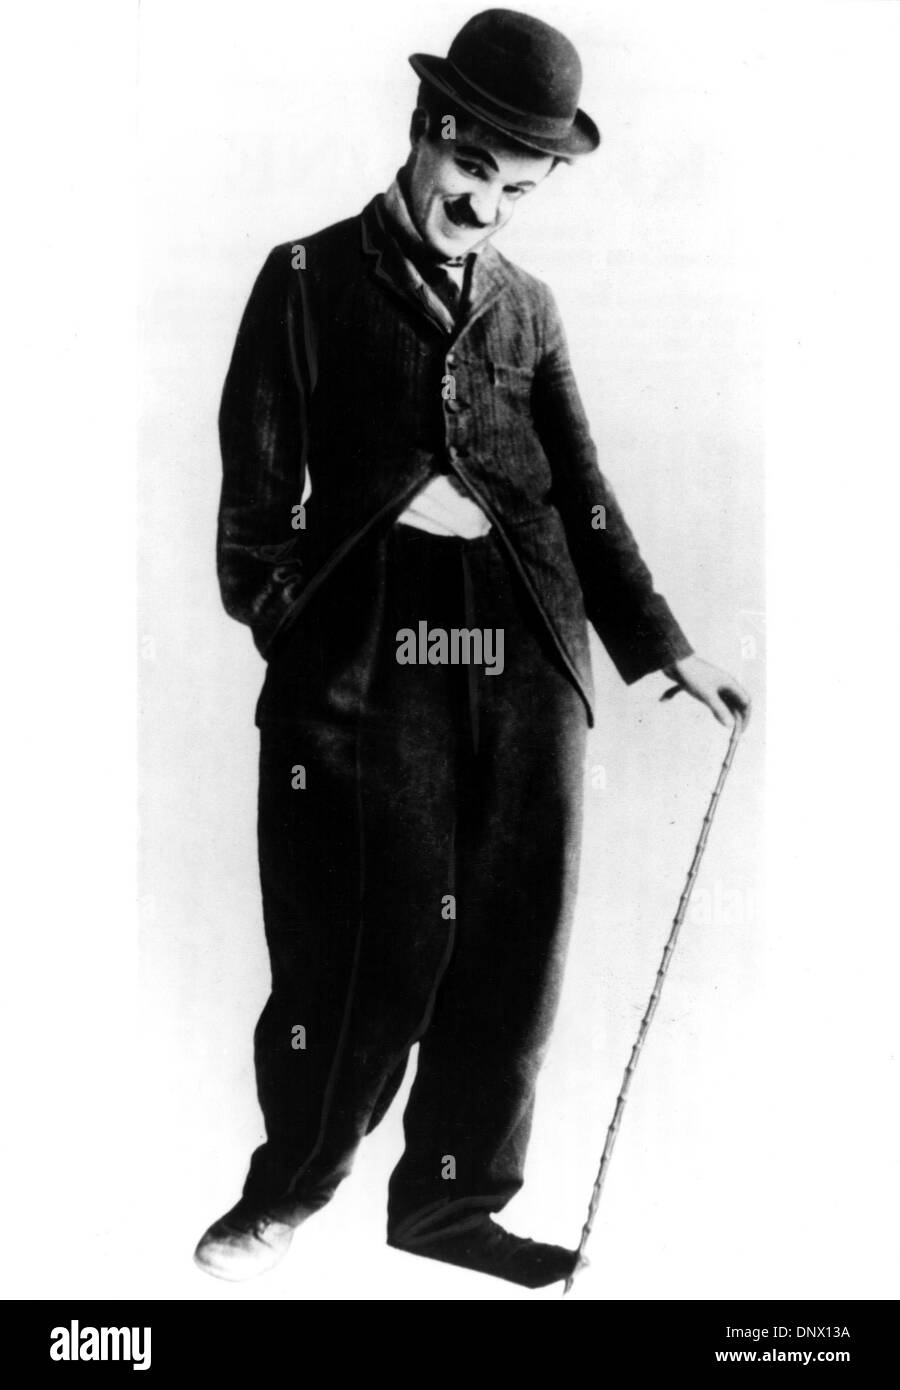 Jan. 1, 1930 - Los Angeles, CA, U.S. - British comedian and director CHARLIE CHAPLIN as a tramp. Sir Charles Spencer Chaplin, Jr. KBE (16 April 1889 Ð 25 December 1977), better known as CHARLIE CHAPLIN, was an English comedy actor, becoming one of the most famous performers in the early to mid Hollywood cinema era, and also a notable director. He is considered to be one of the fine Stock Photo